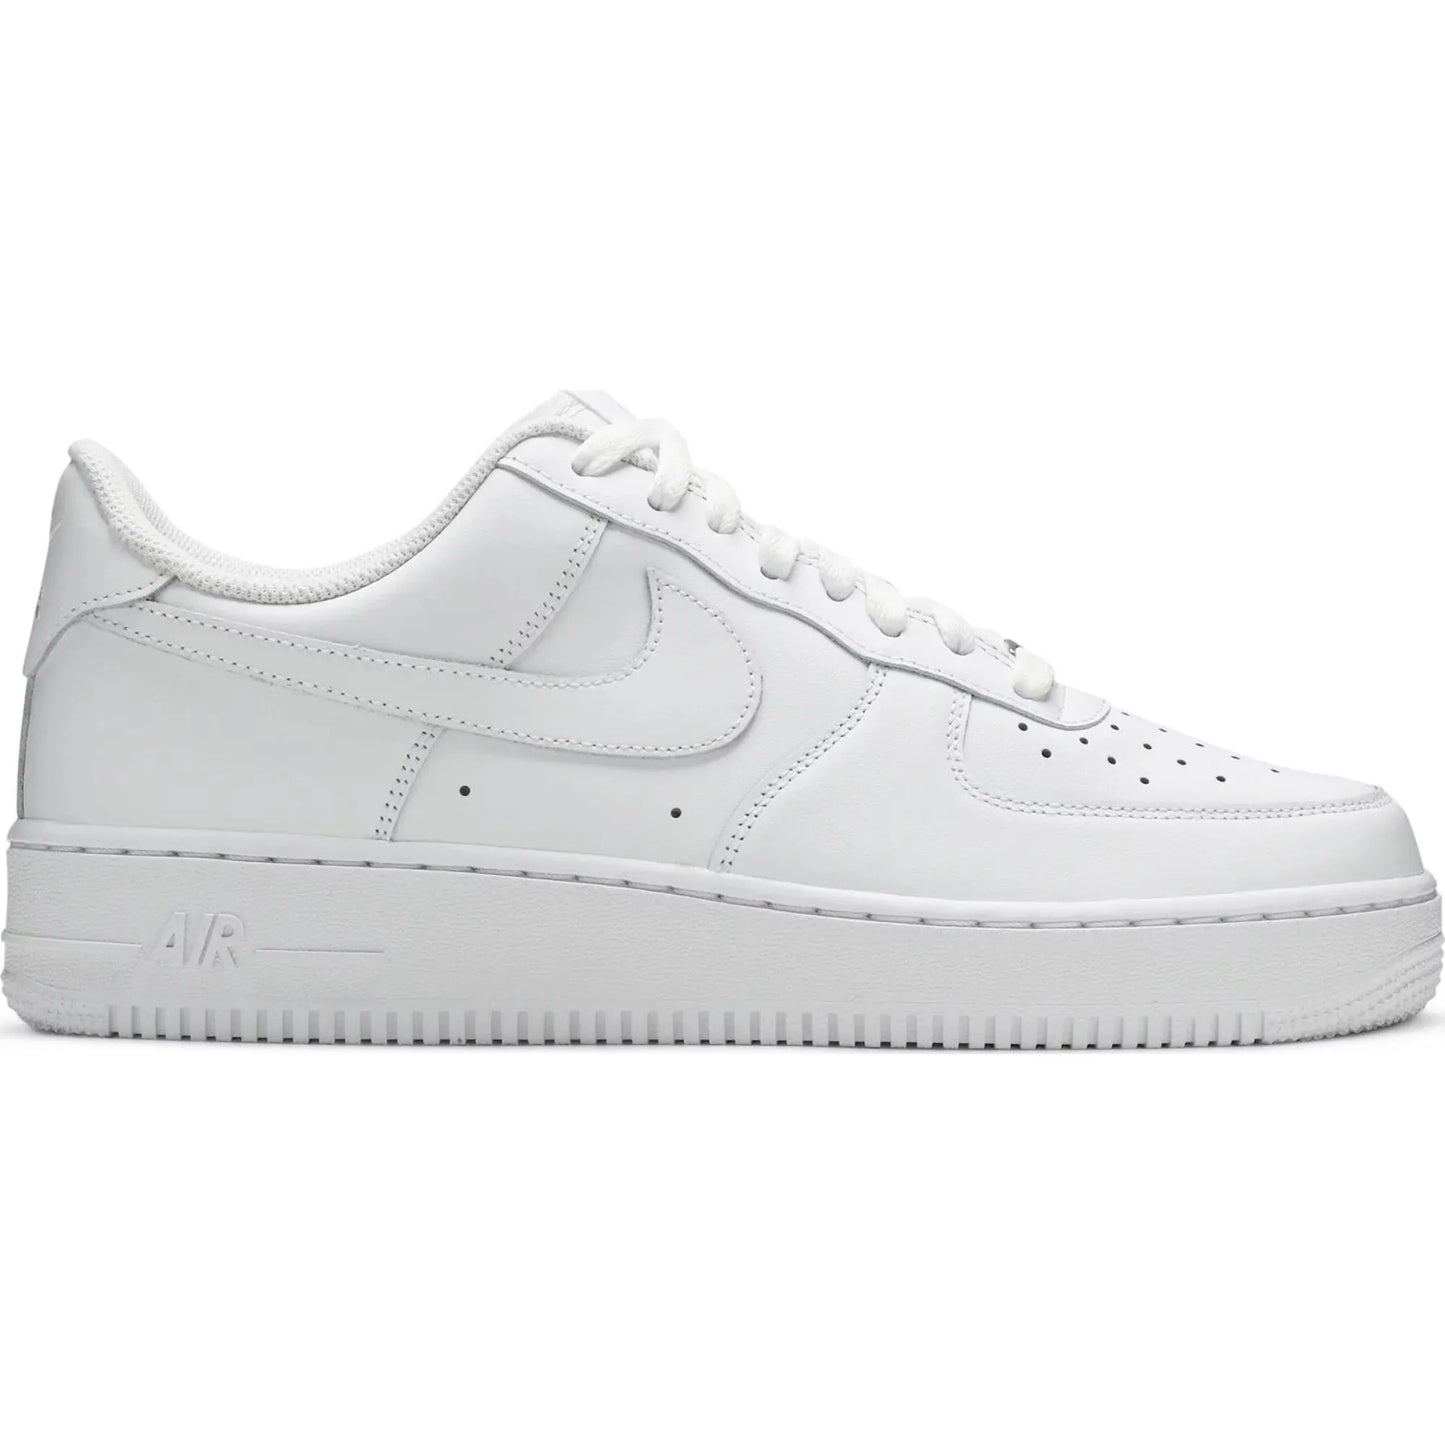 Nike Air Force 1 Low '07 (White)